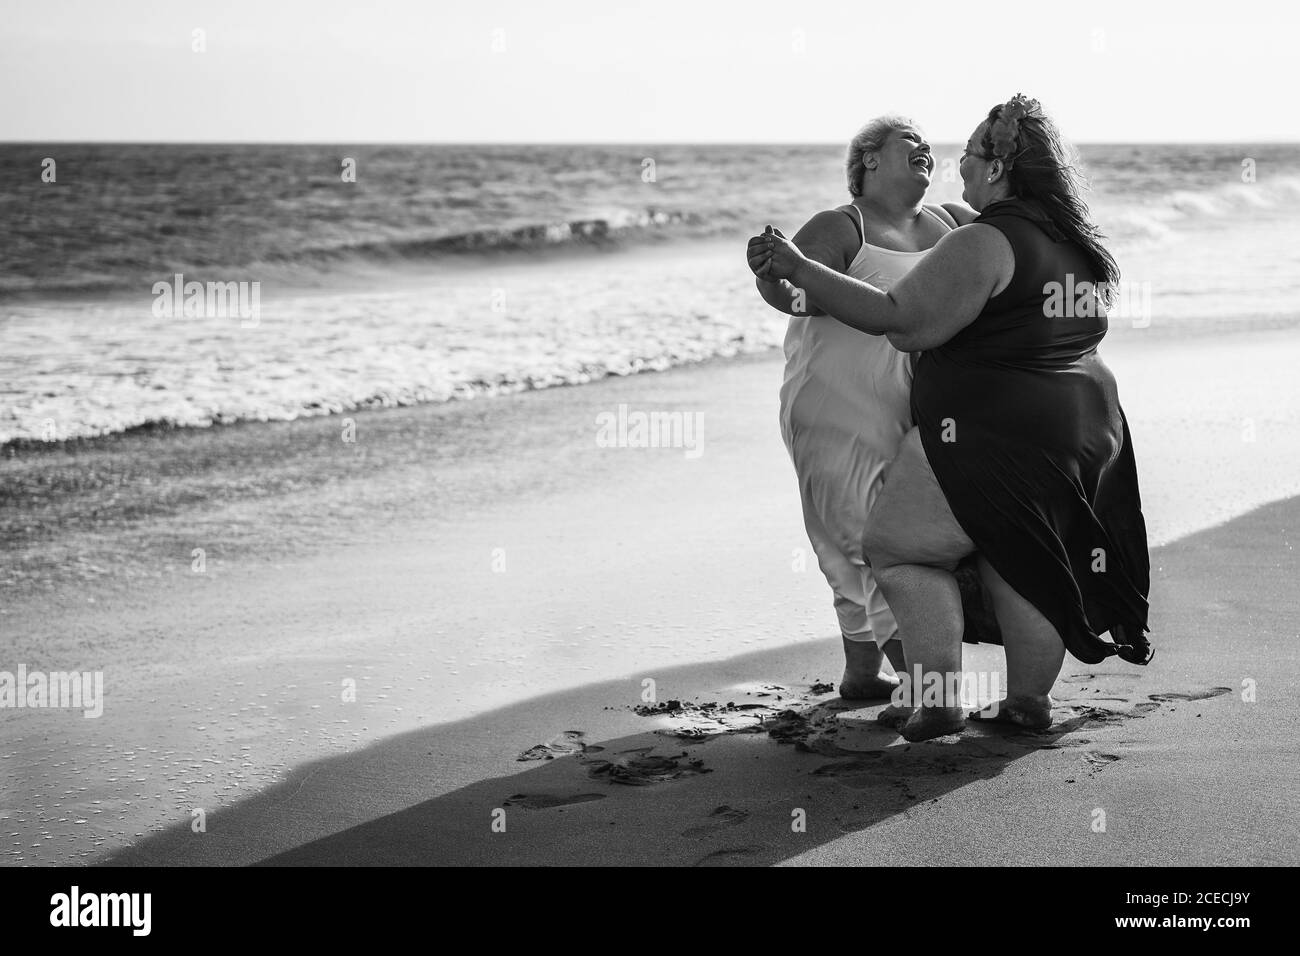 Plus size women dancing on beach fun summer vacation - female laughing together - Overweight body and happiness concept - Blac Stock Photo - Alamy